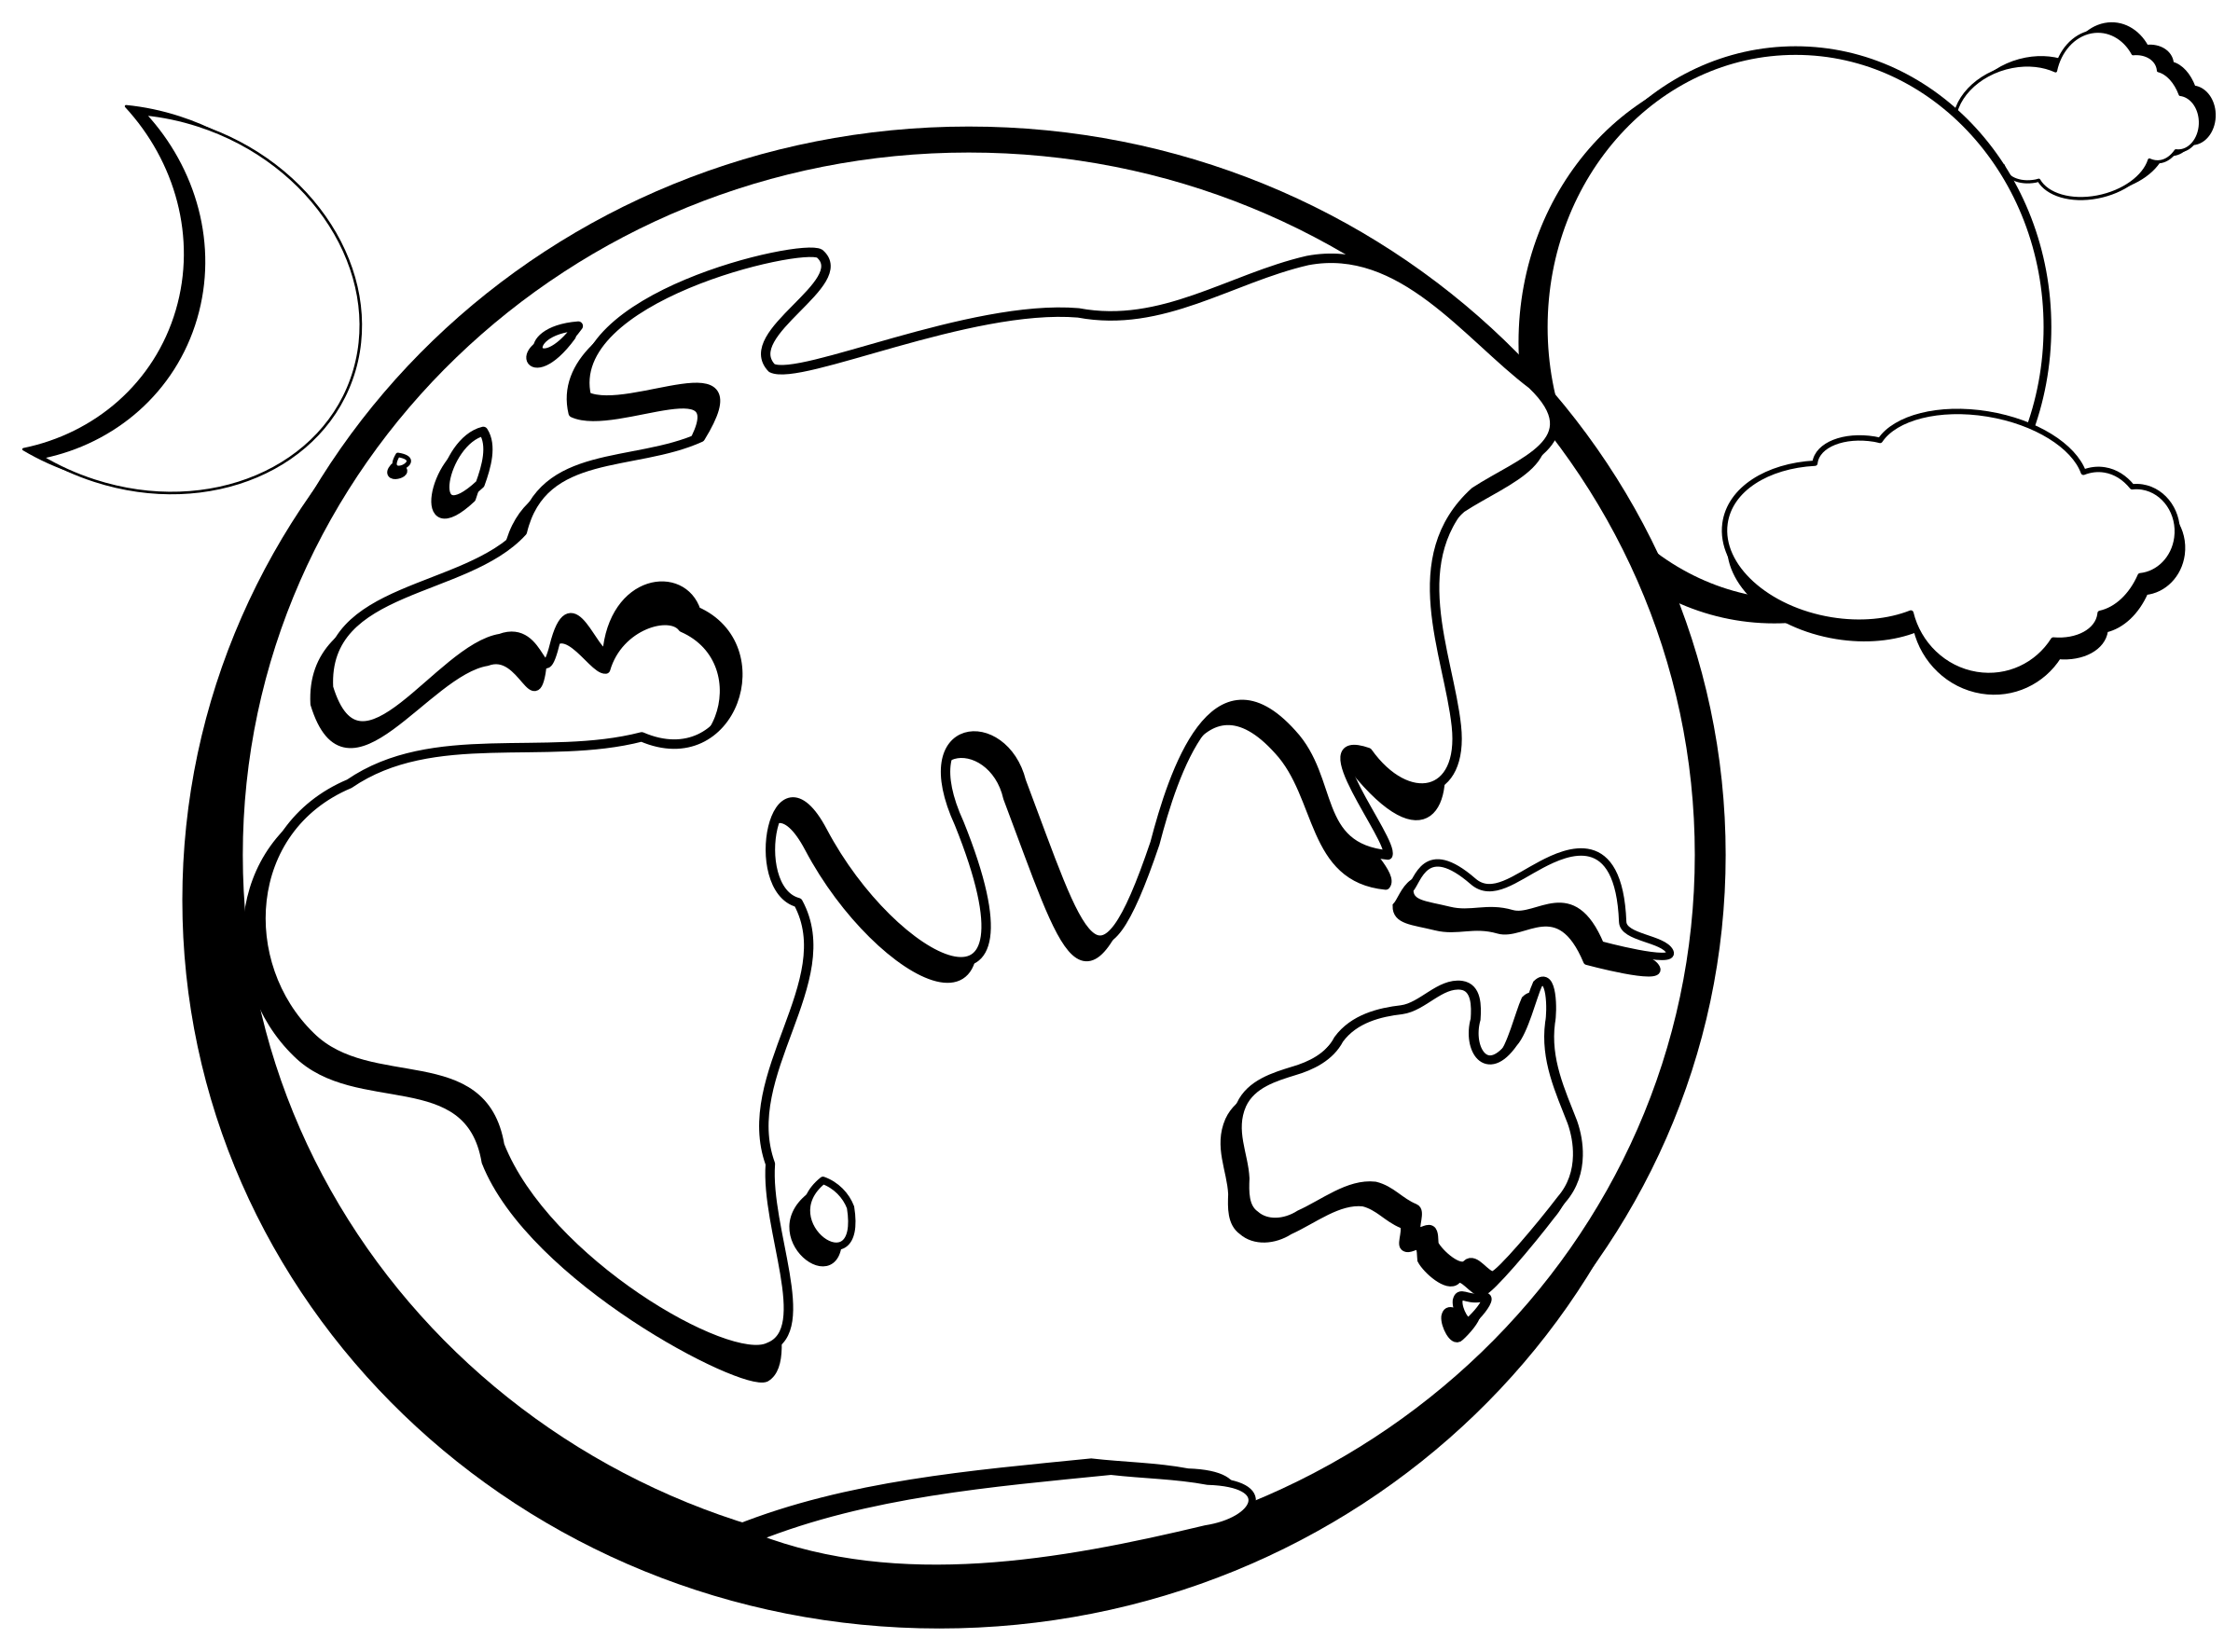 earth clipart outline